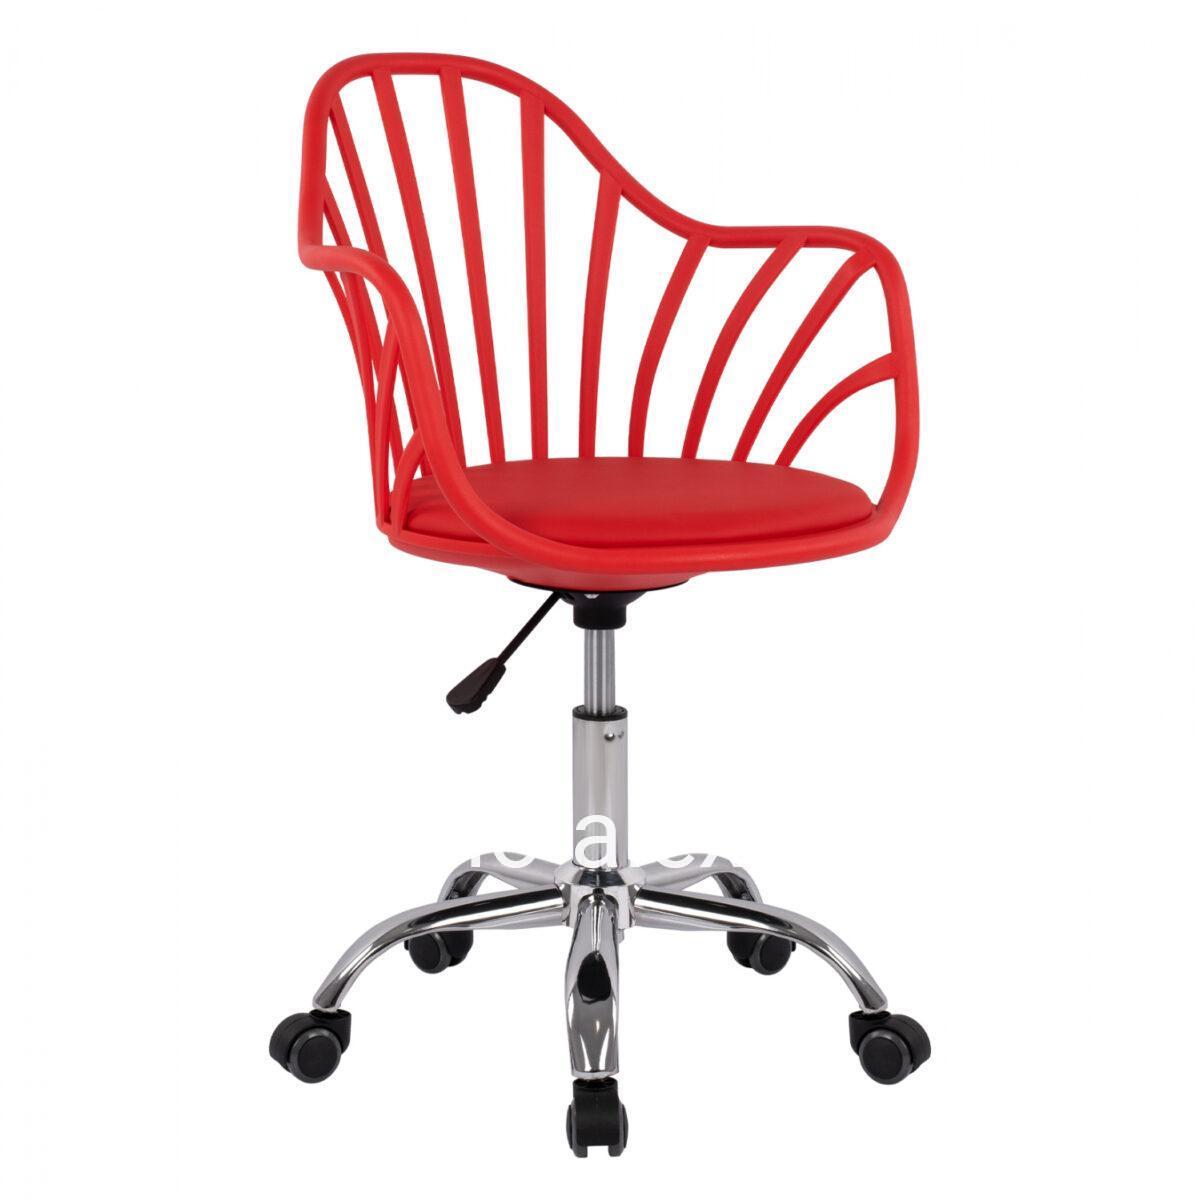 Office Chair Becky HM8457.04 Red Color 57x57x96 cm